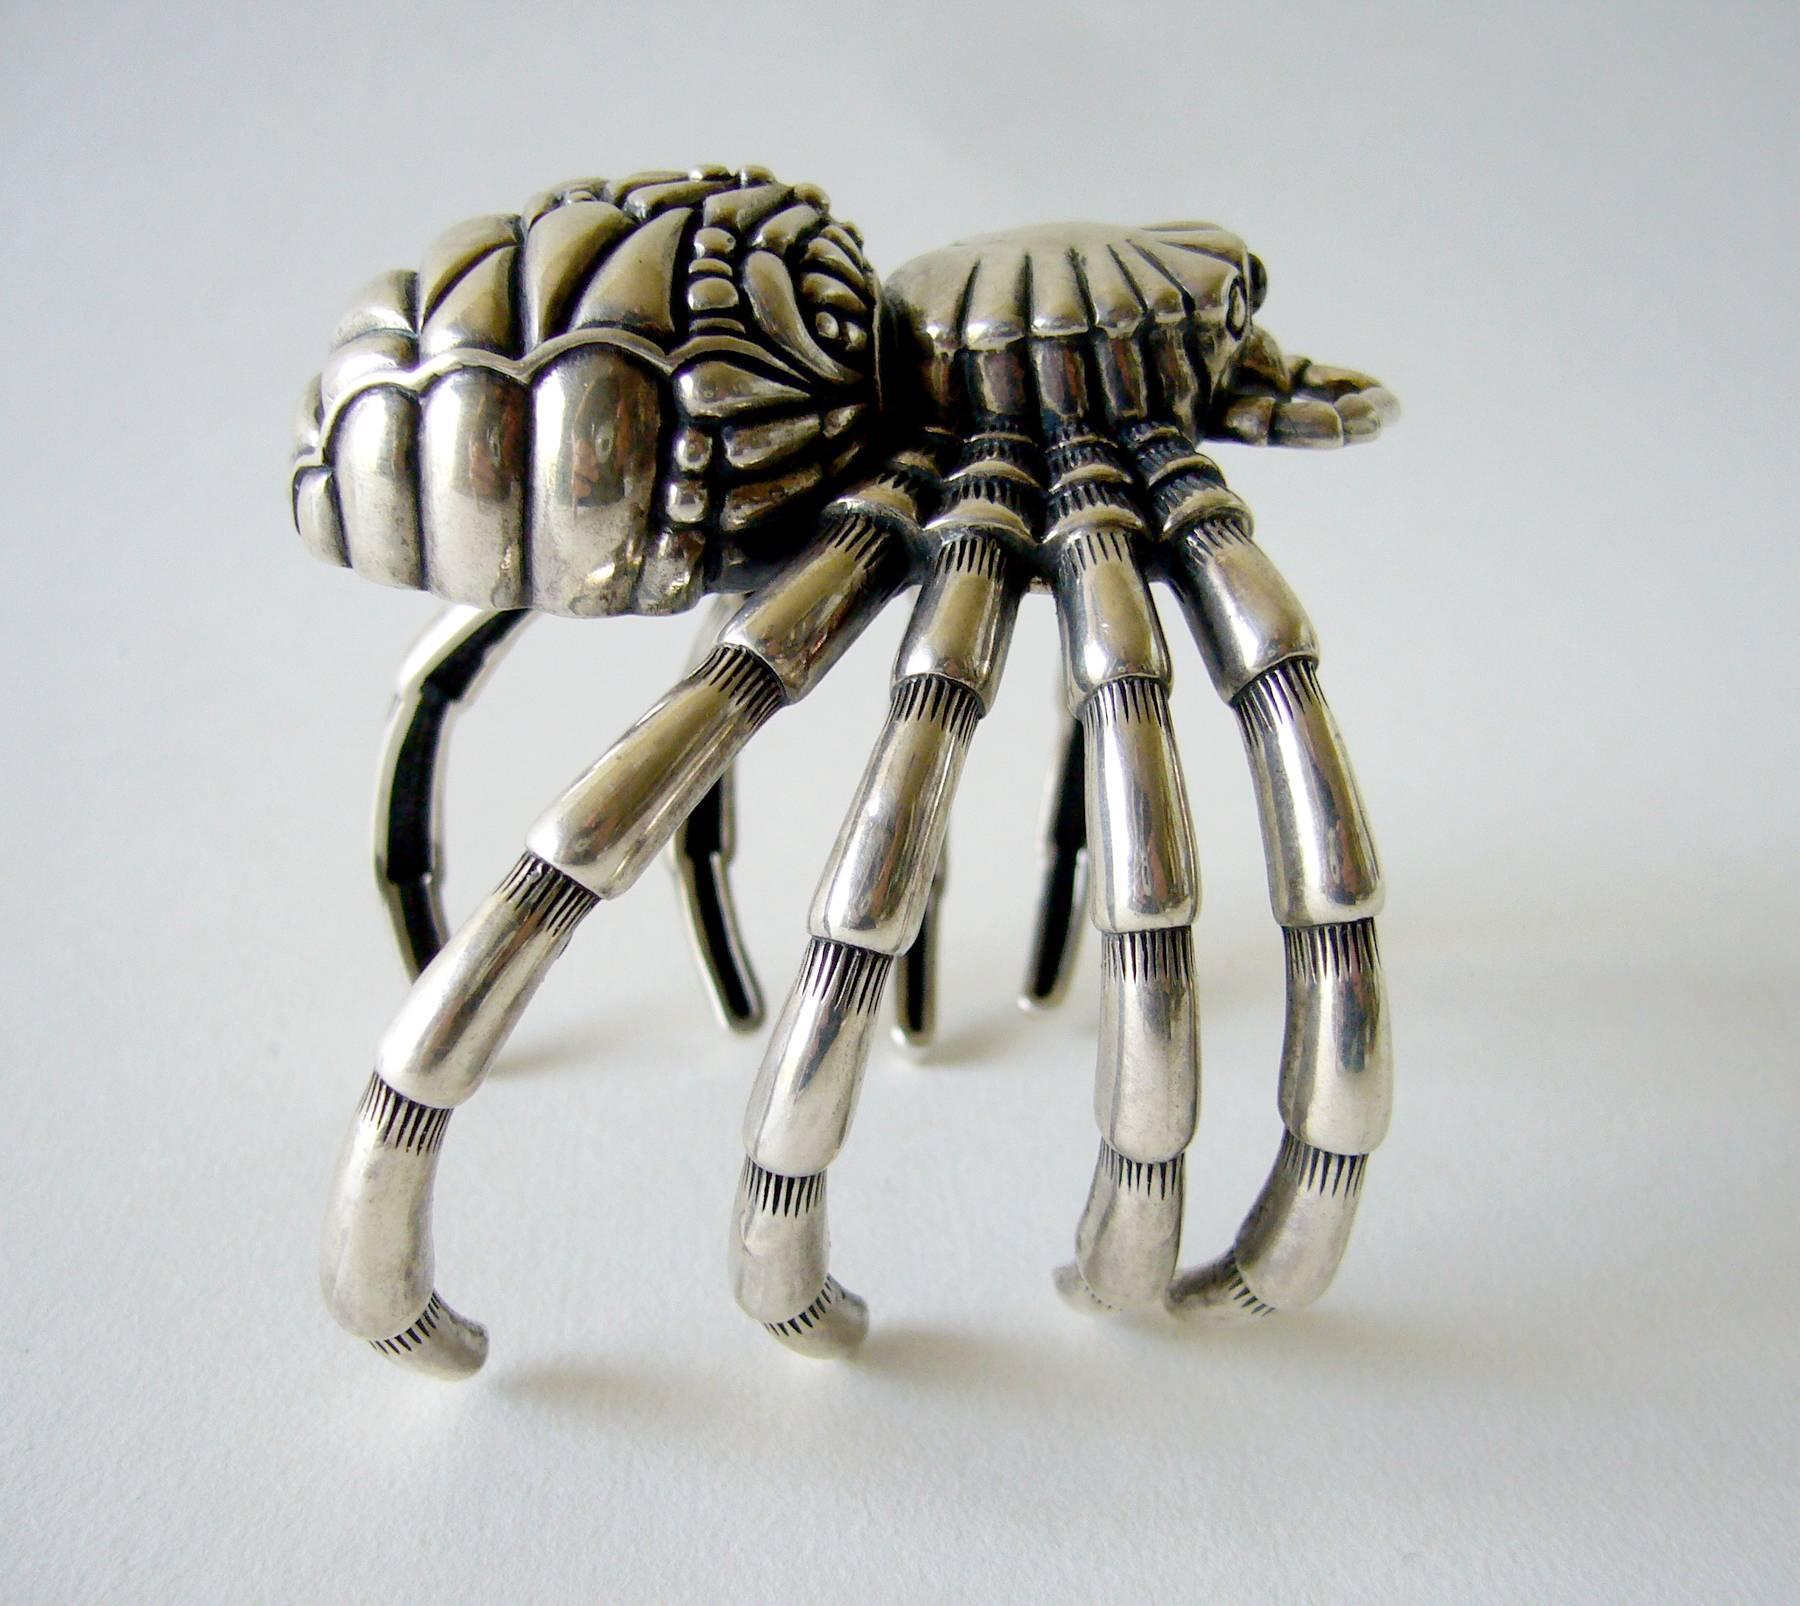 Large scale sterling silver tarantula cuff bracelet, circa 2000's.  Fine detailing overall and featuring hematite eyes.  Bracelet will fit a medium to large wrist and arm.  Wearable wrist length of about 7.75